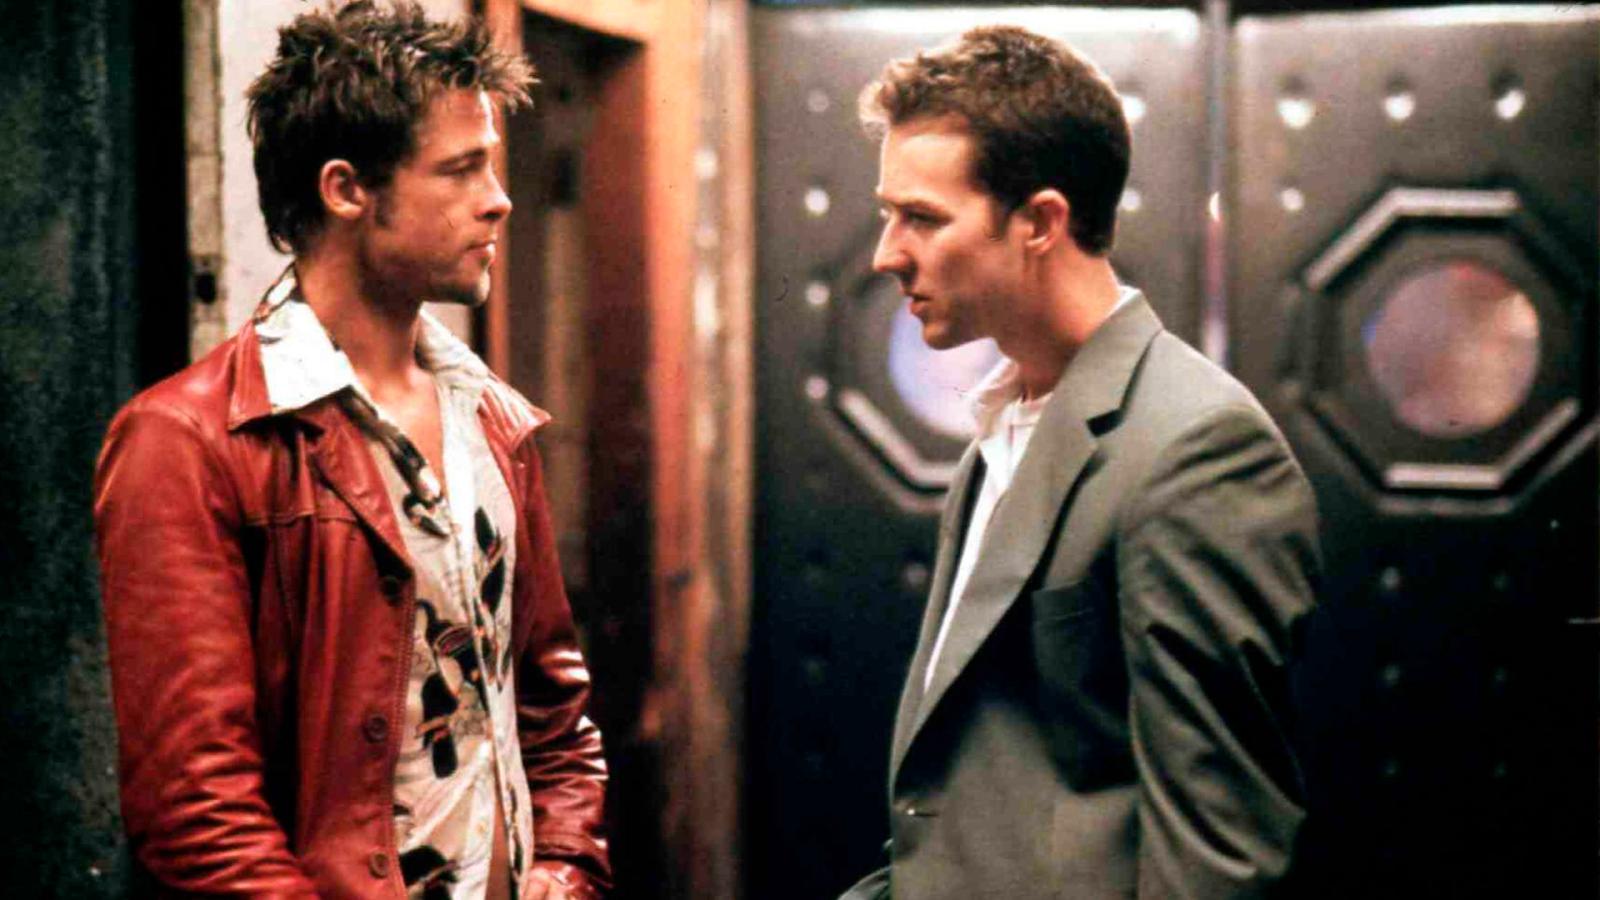 5 David Fincher's Greatest Movies To Watch If You Loved The Killer - image 2